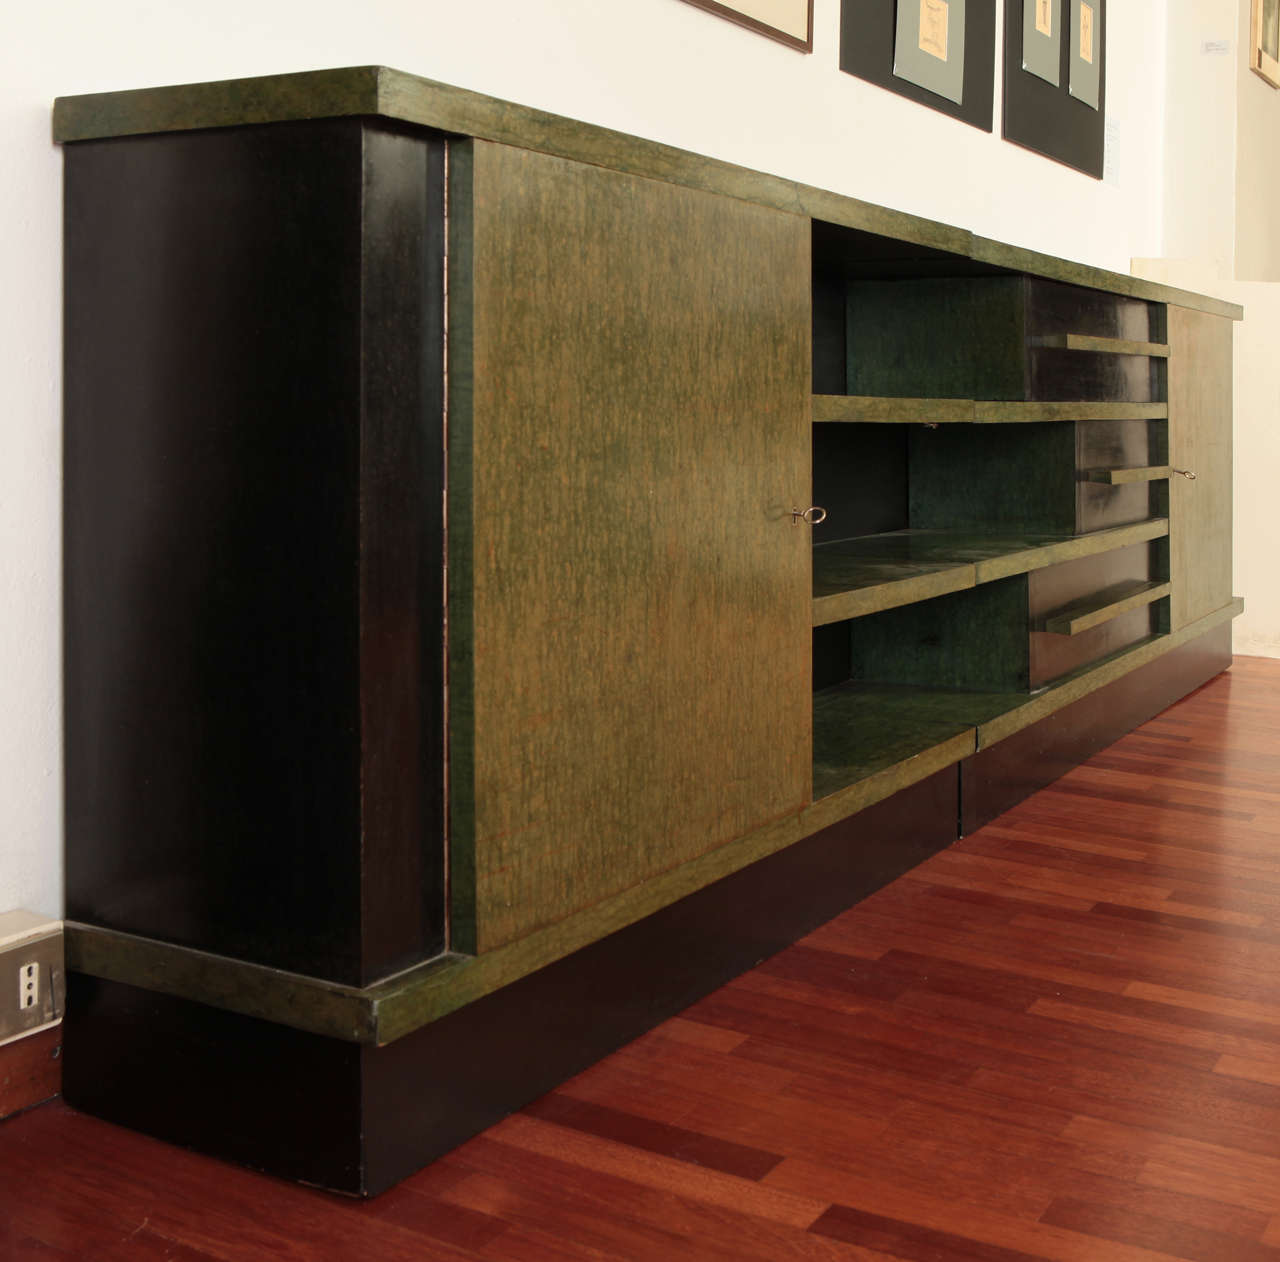 The Bookcase is assembled into two parts: the first part's length is 121 centimeters and the second one is 177 centimeters.